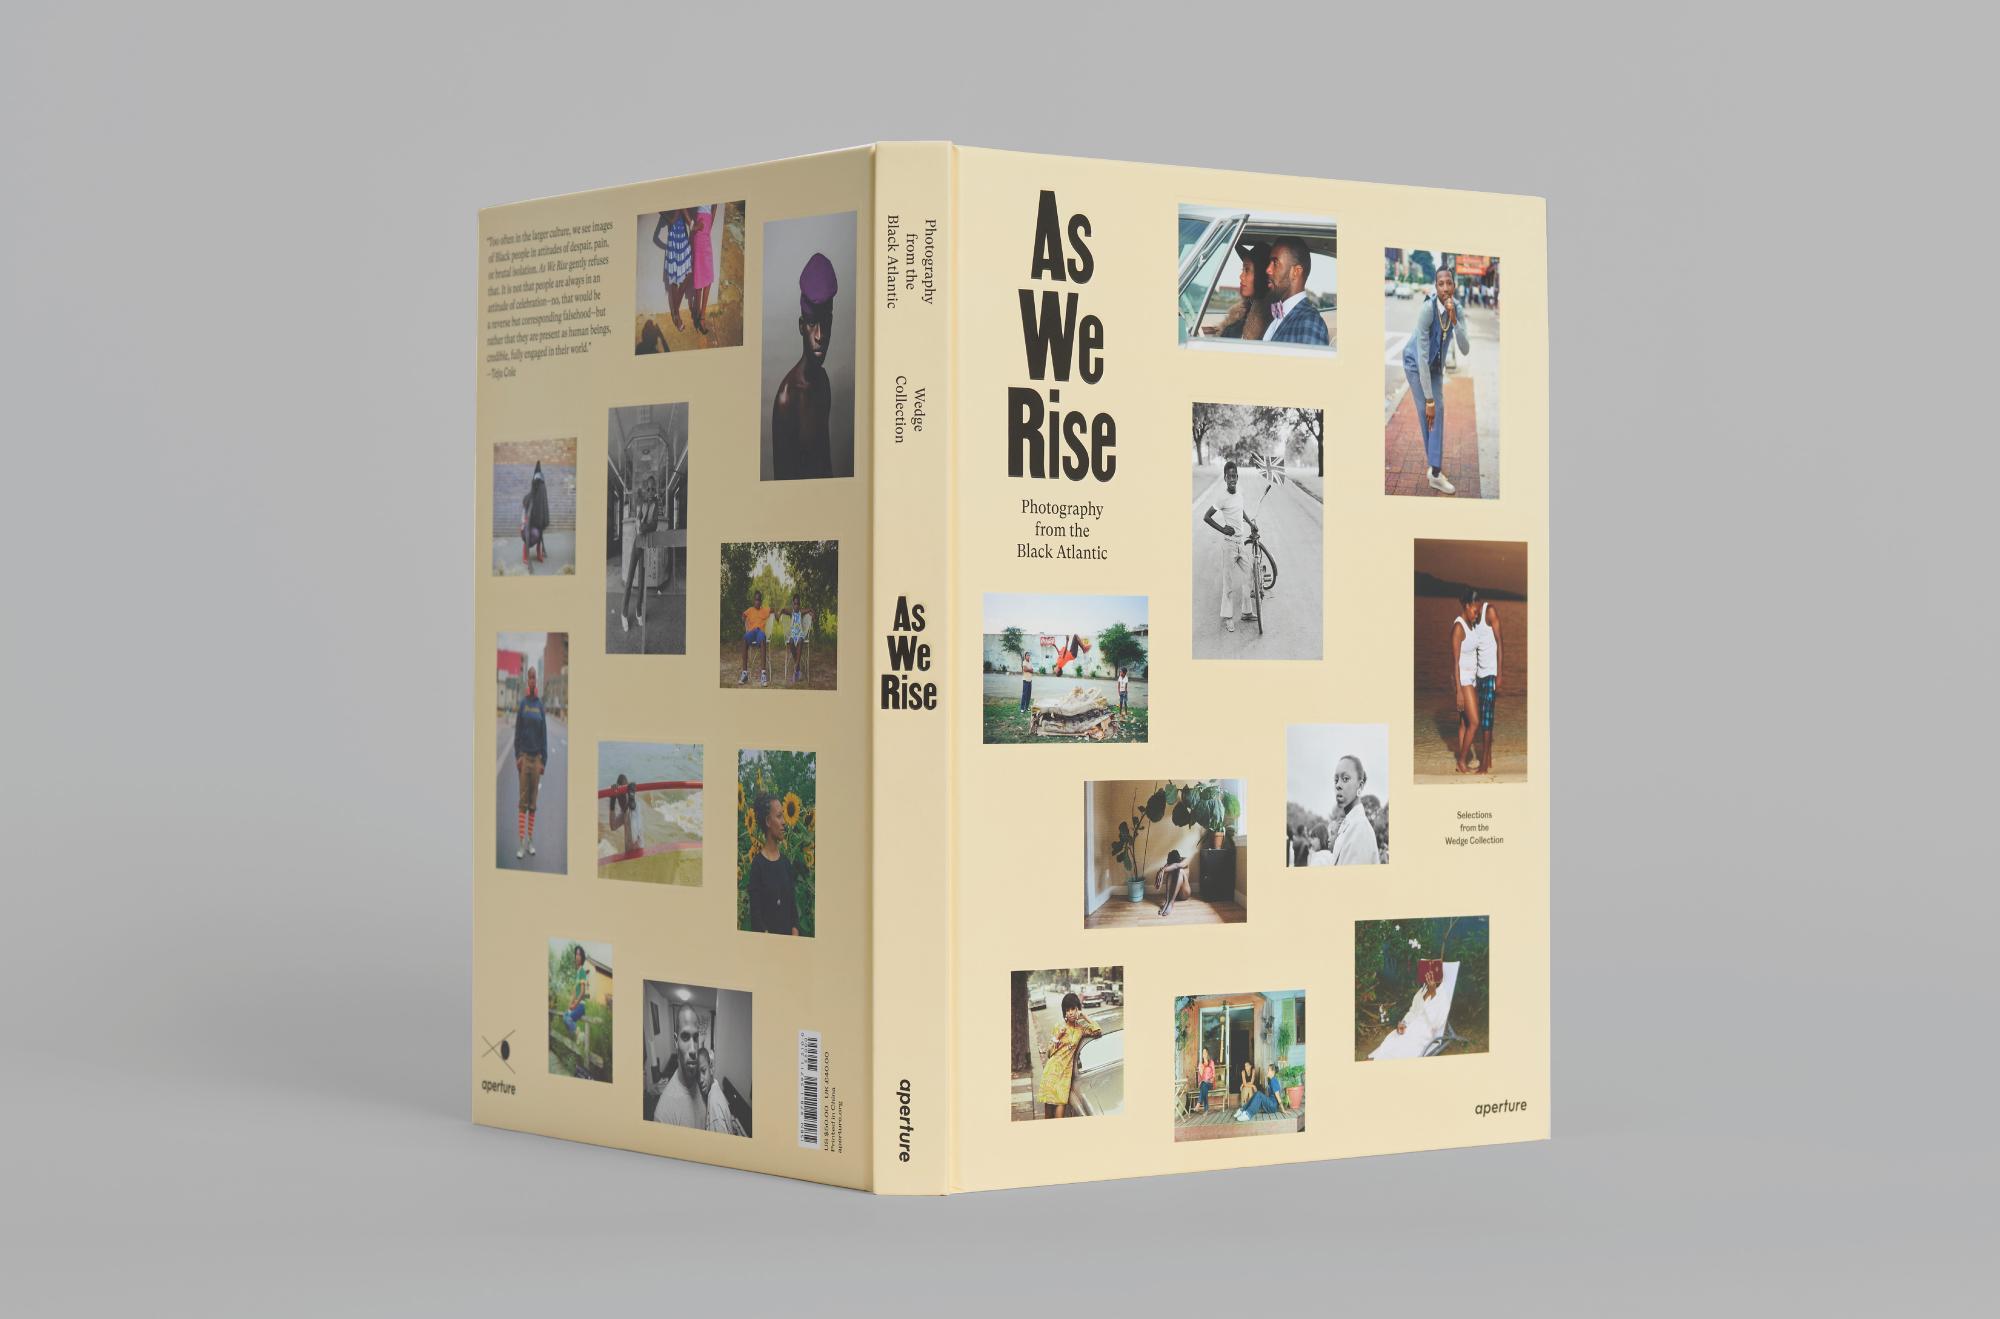 As We Rise Book Design by Jeanette Abbink